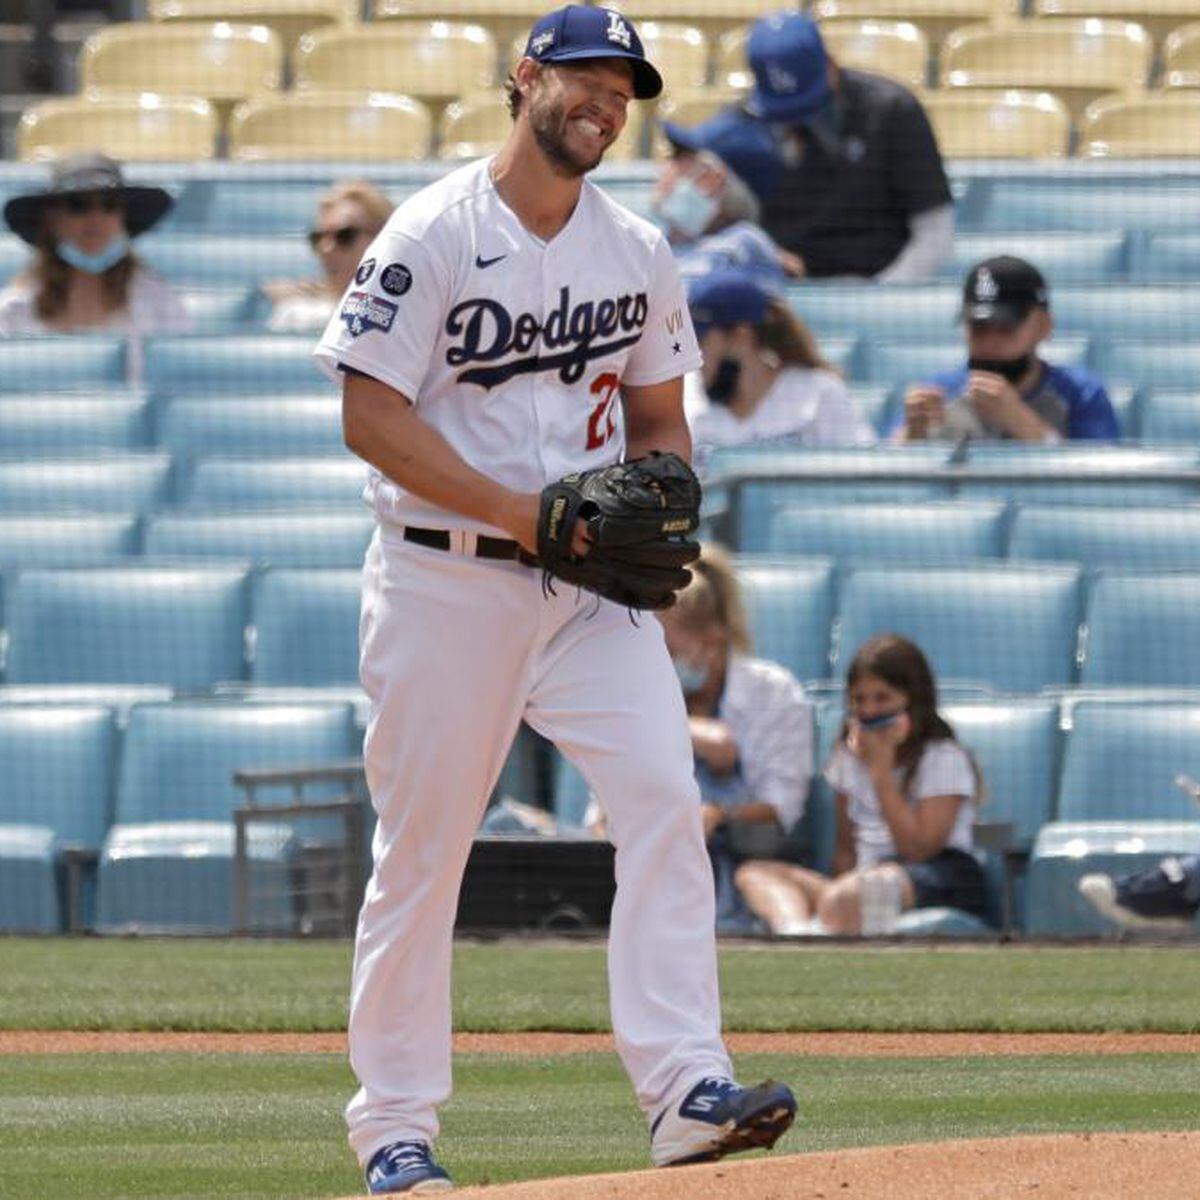 MLB playoffs: Clayton Kershaw strikes out 13 as Dodgers sweep